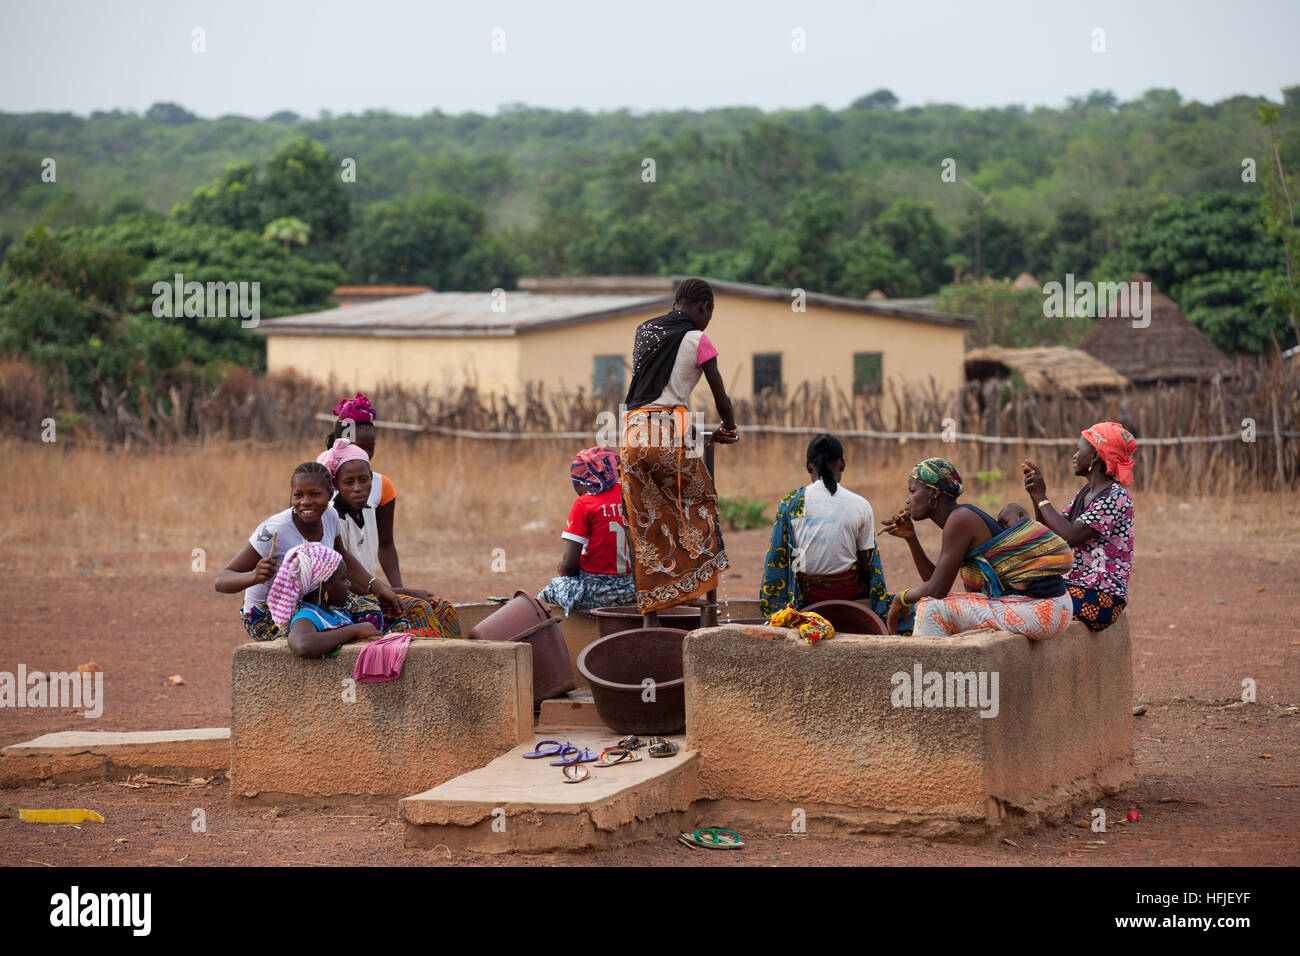 Koumban village, Guinea, 2nd May 2015; Women drawing water from a communal foot-pump water point. Stock Photo